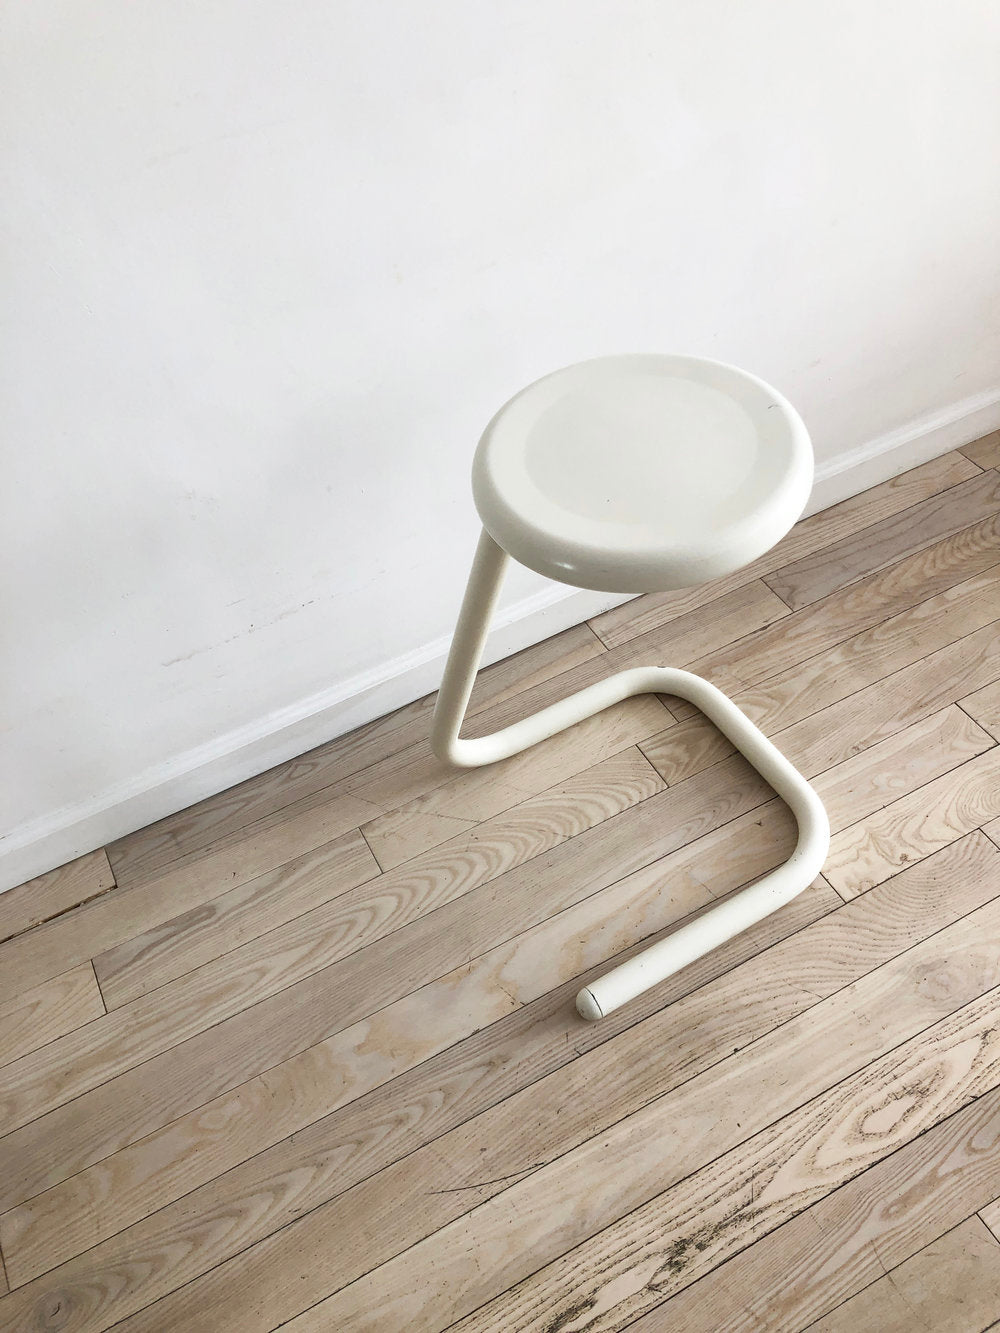 1971 White Metal Tubular Paper Clip Counter Stool by Kinetics